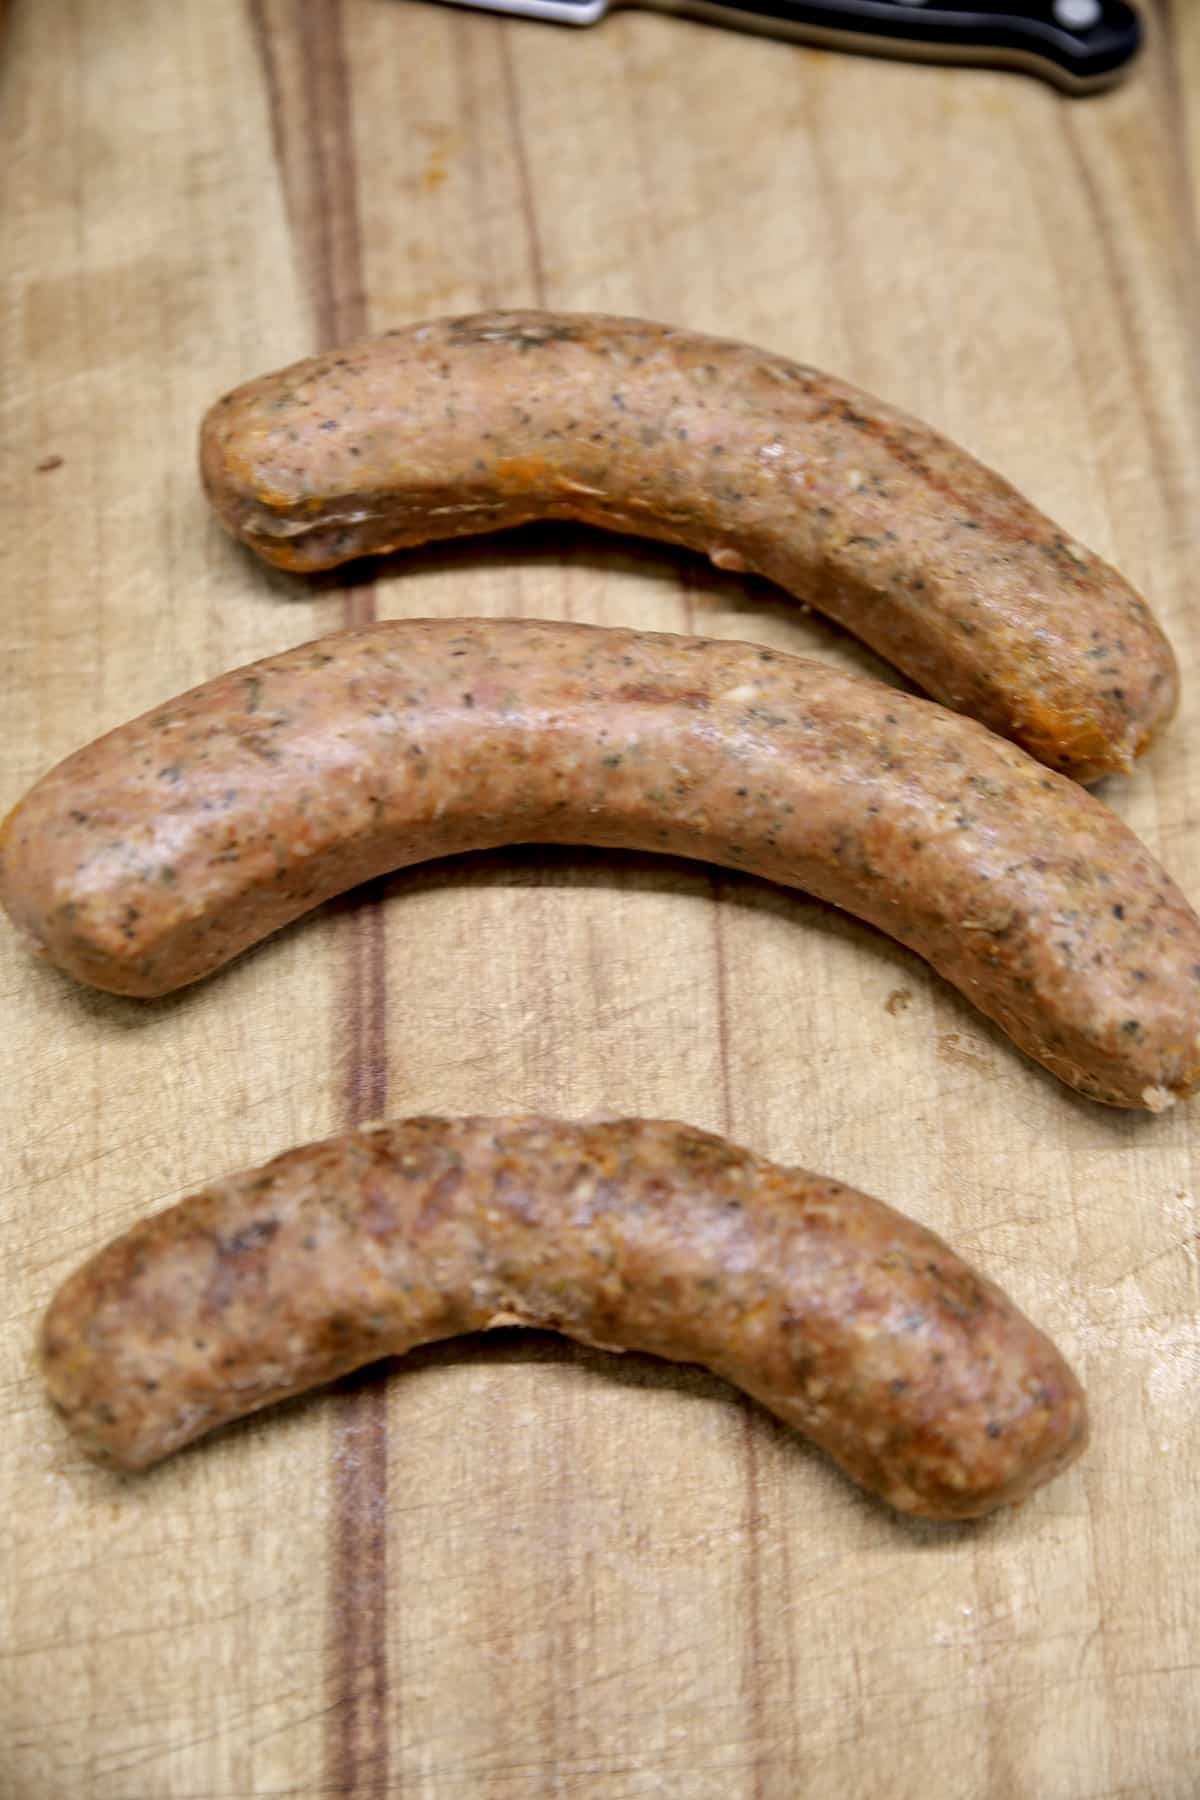 3 links of smoked sausage, uncooked.